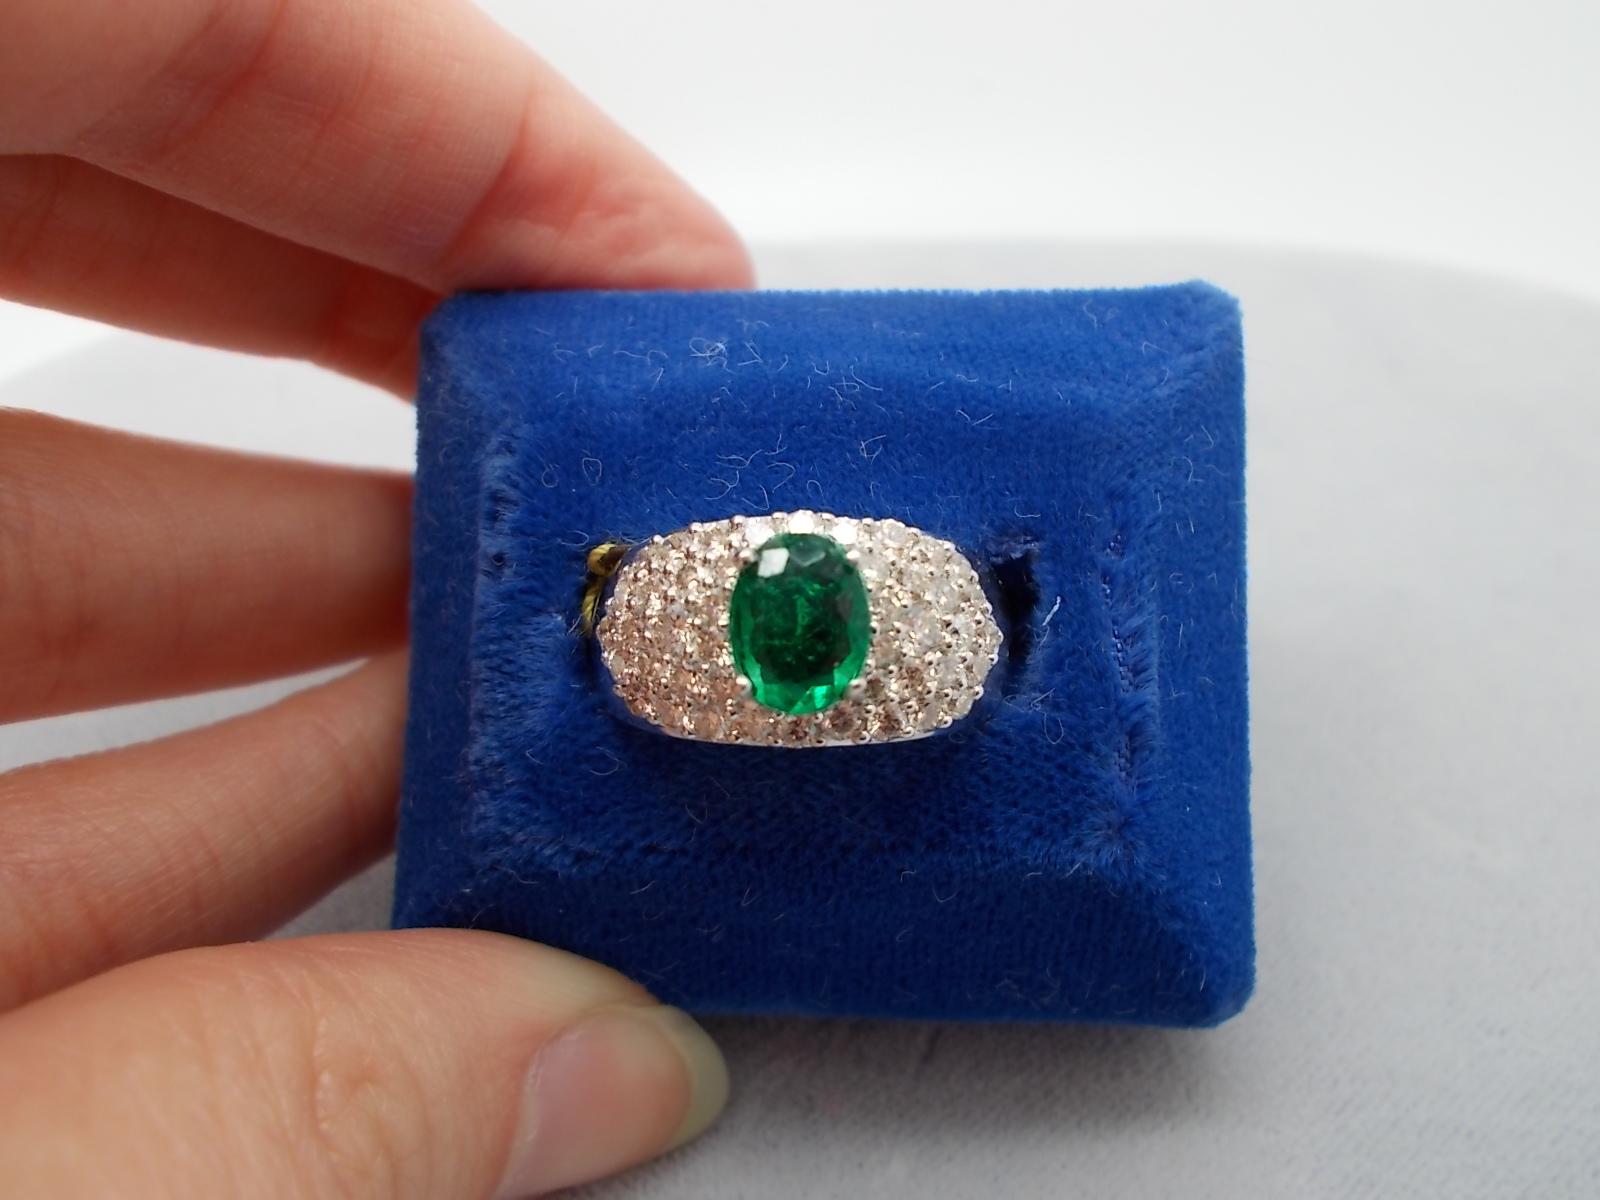 14k White Gold .81ct Genuine Natural Emerald Ring with Diamonds (#J667)
Very stunning 14k white gold ring with a gorgeous .81ct oval emerald in an excellent green color, which measures 7.8x6.0mm. The ring also has dazzling round brilliant cut